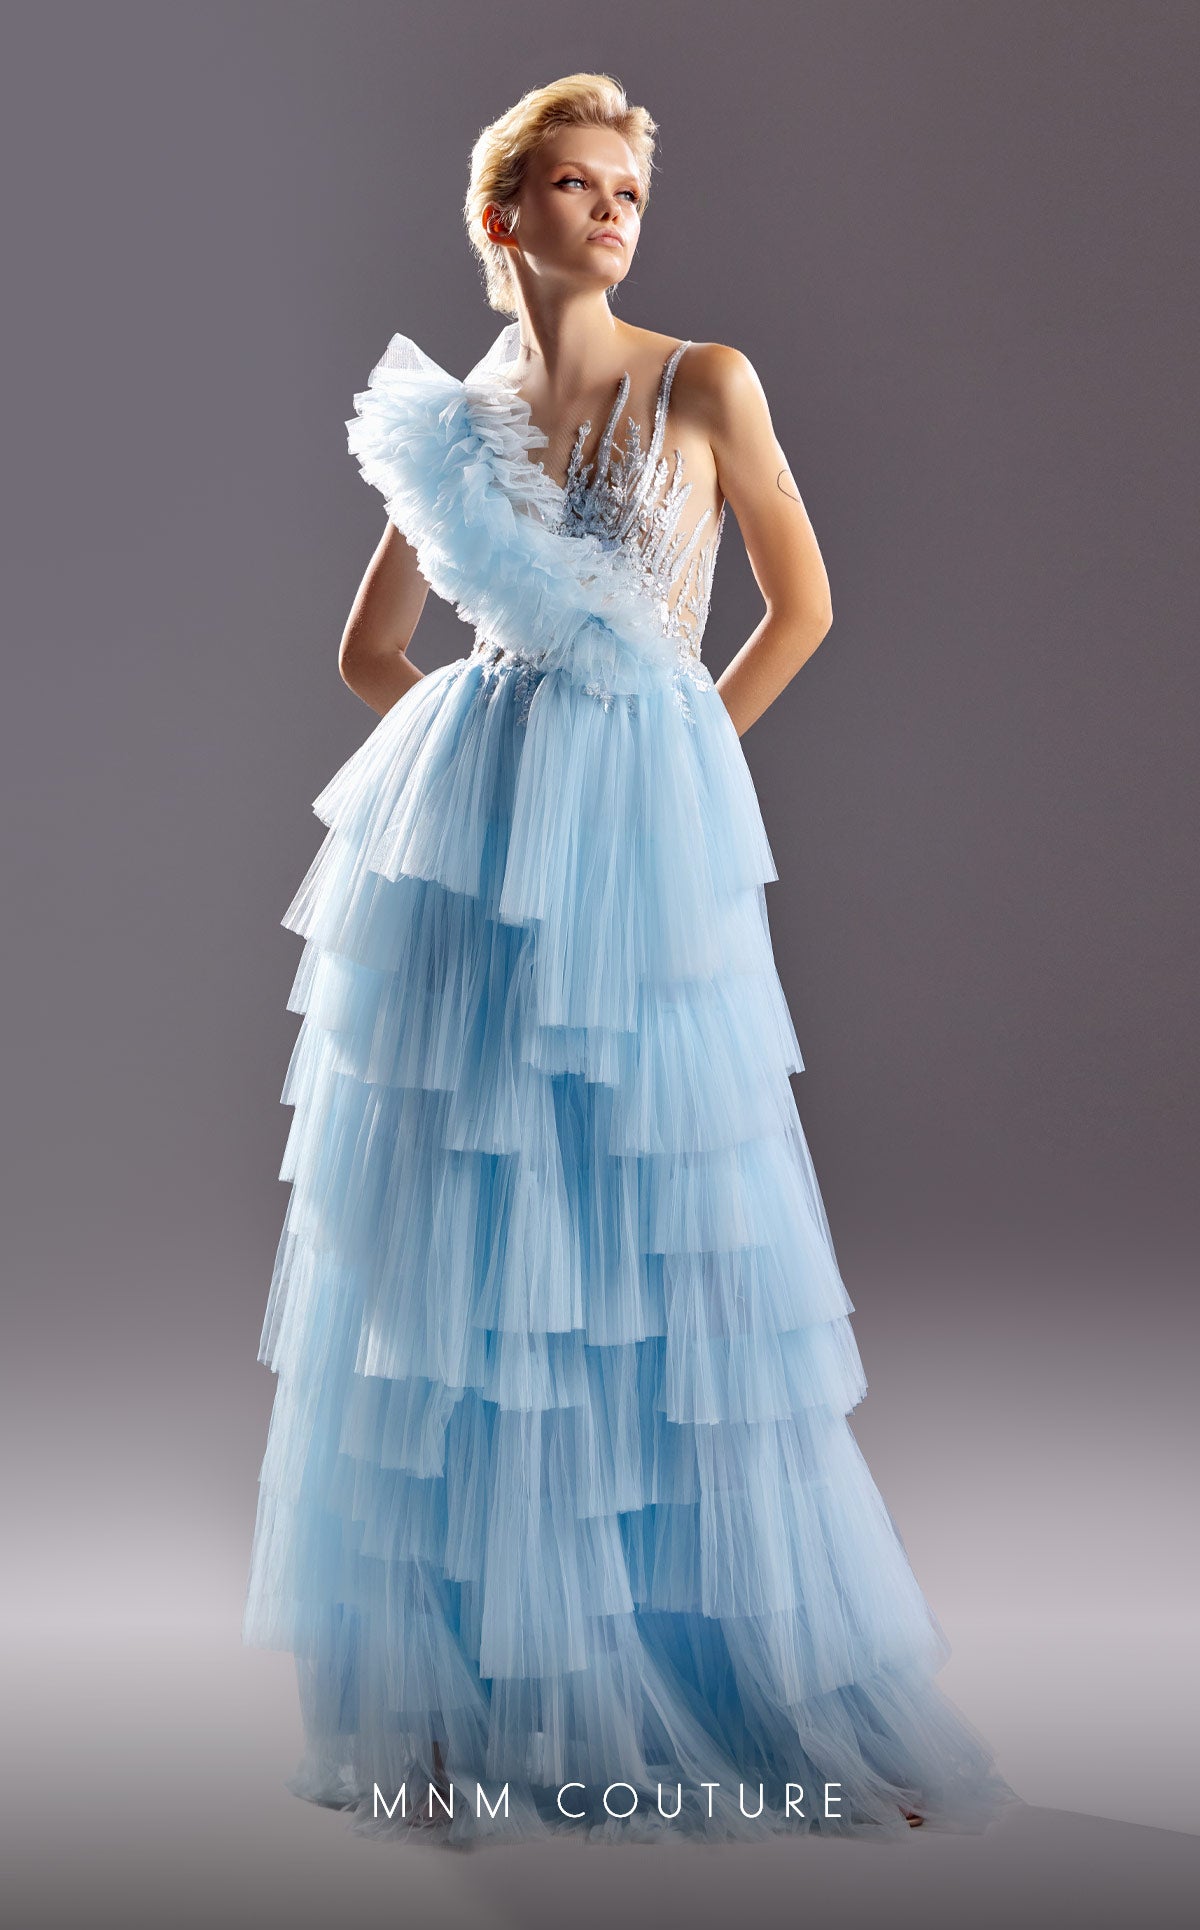 G1528 MNM Couture one shoulder blue tiered long dress boasts a sheer bodice with intricate beaded detailing crawling upwards creating an incredible flattering pattern for your figure